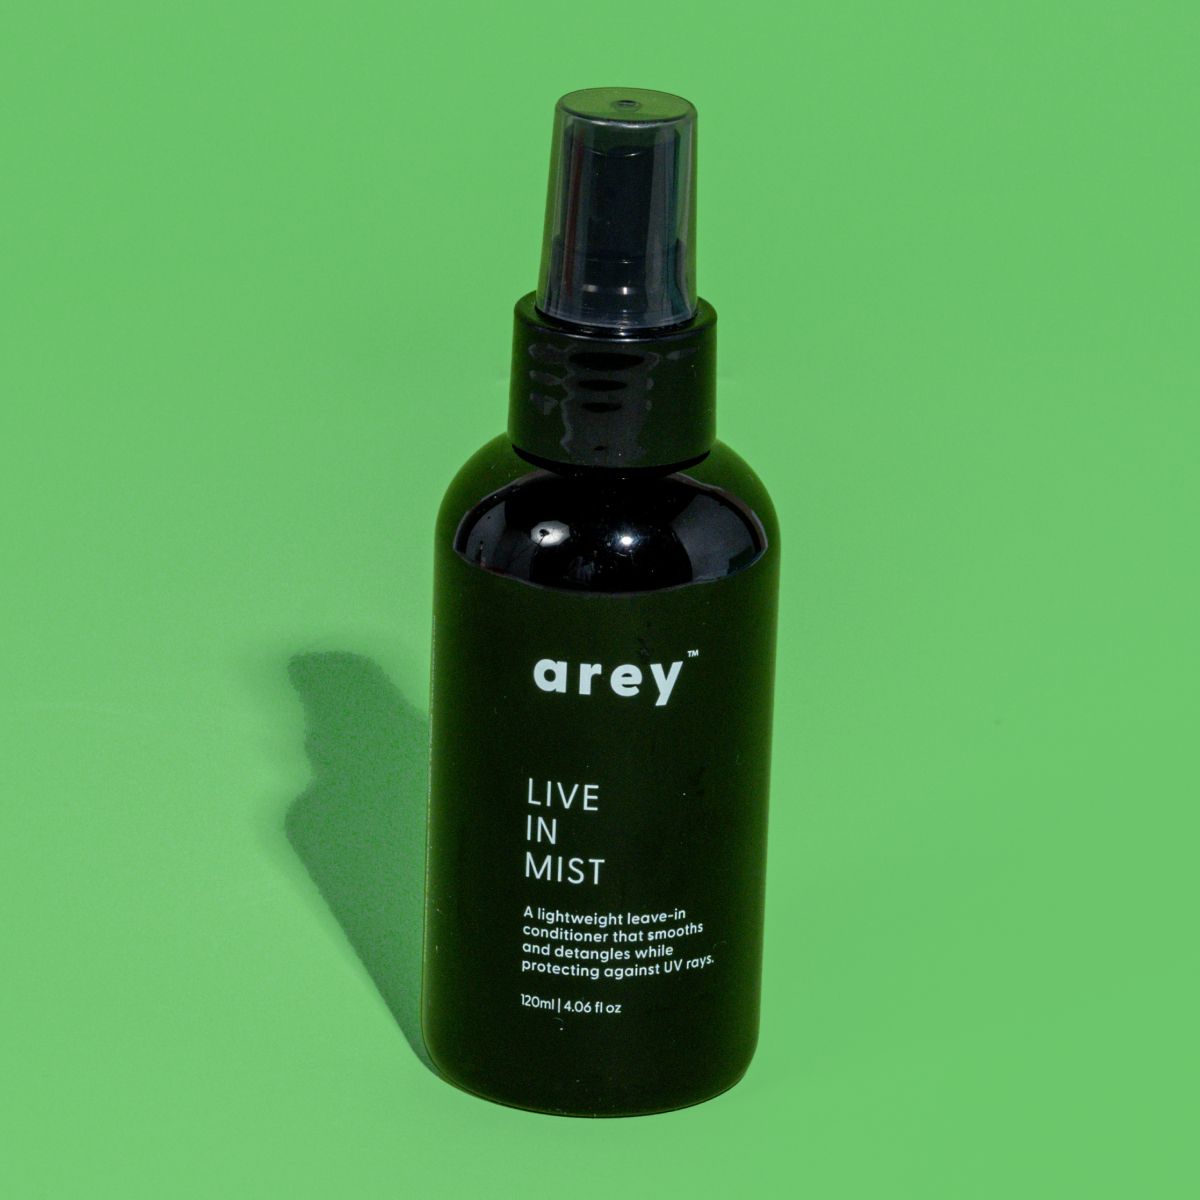 Staycation Box - Arey Haircare Live in Mist Leave-In Conditioner (1).jpg